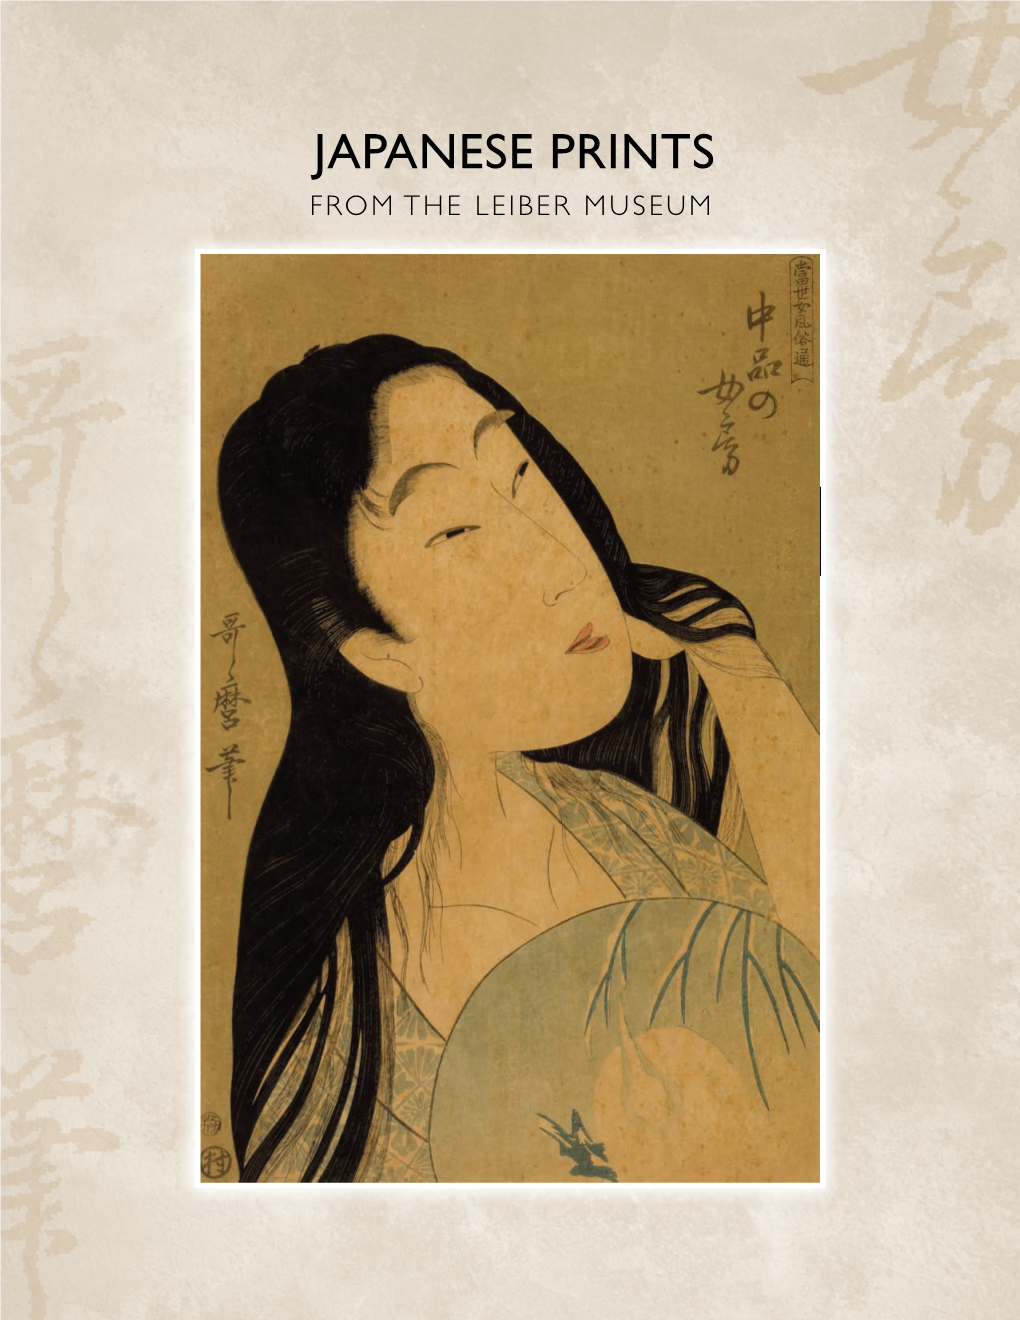 JAPANESE PRINTS FROMTHELEIBERMUSEUM the Judith and Gus Leiber Collection of Japanese Woodblock Prints by E